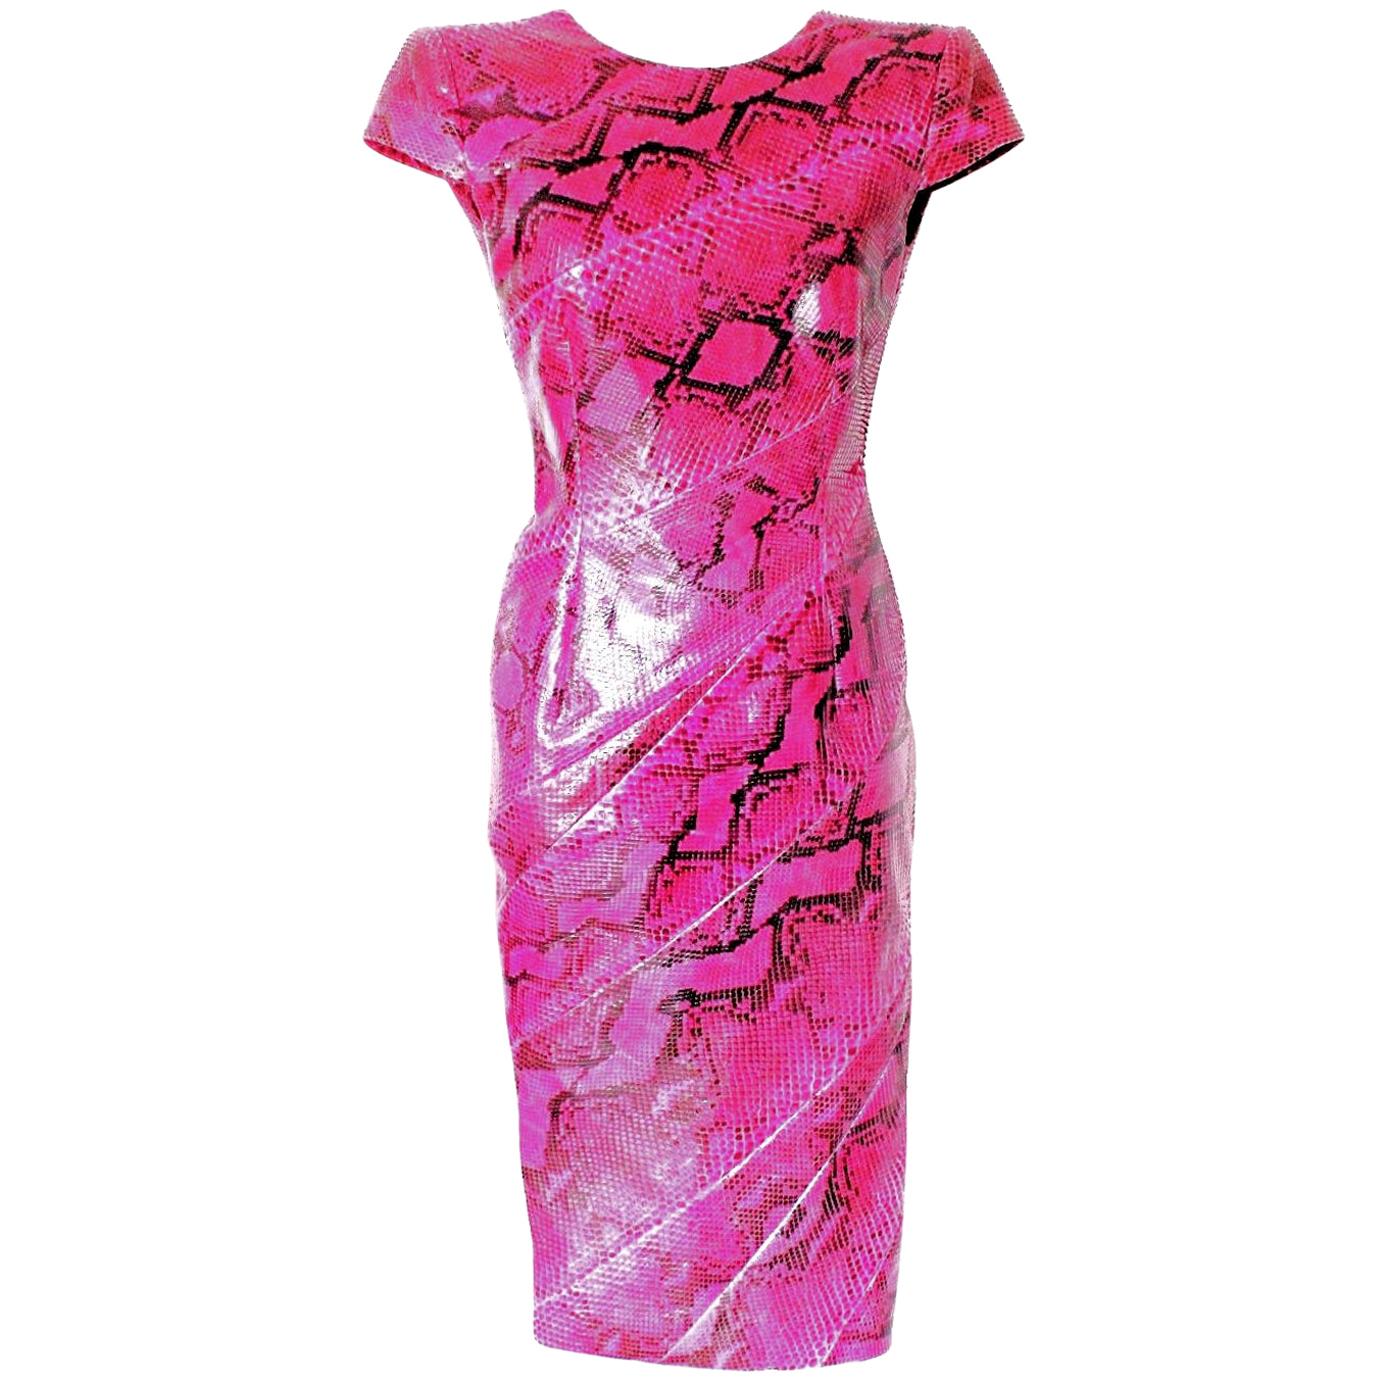 NEW Alexander McQueen 2008 Exotic Pink Evening Dress Tribute to Isabella Blow 42 For Sale